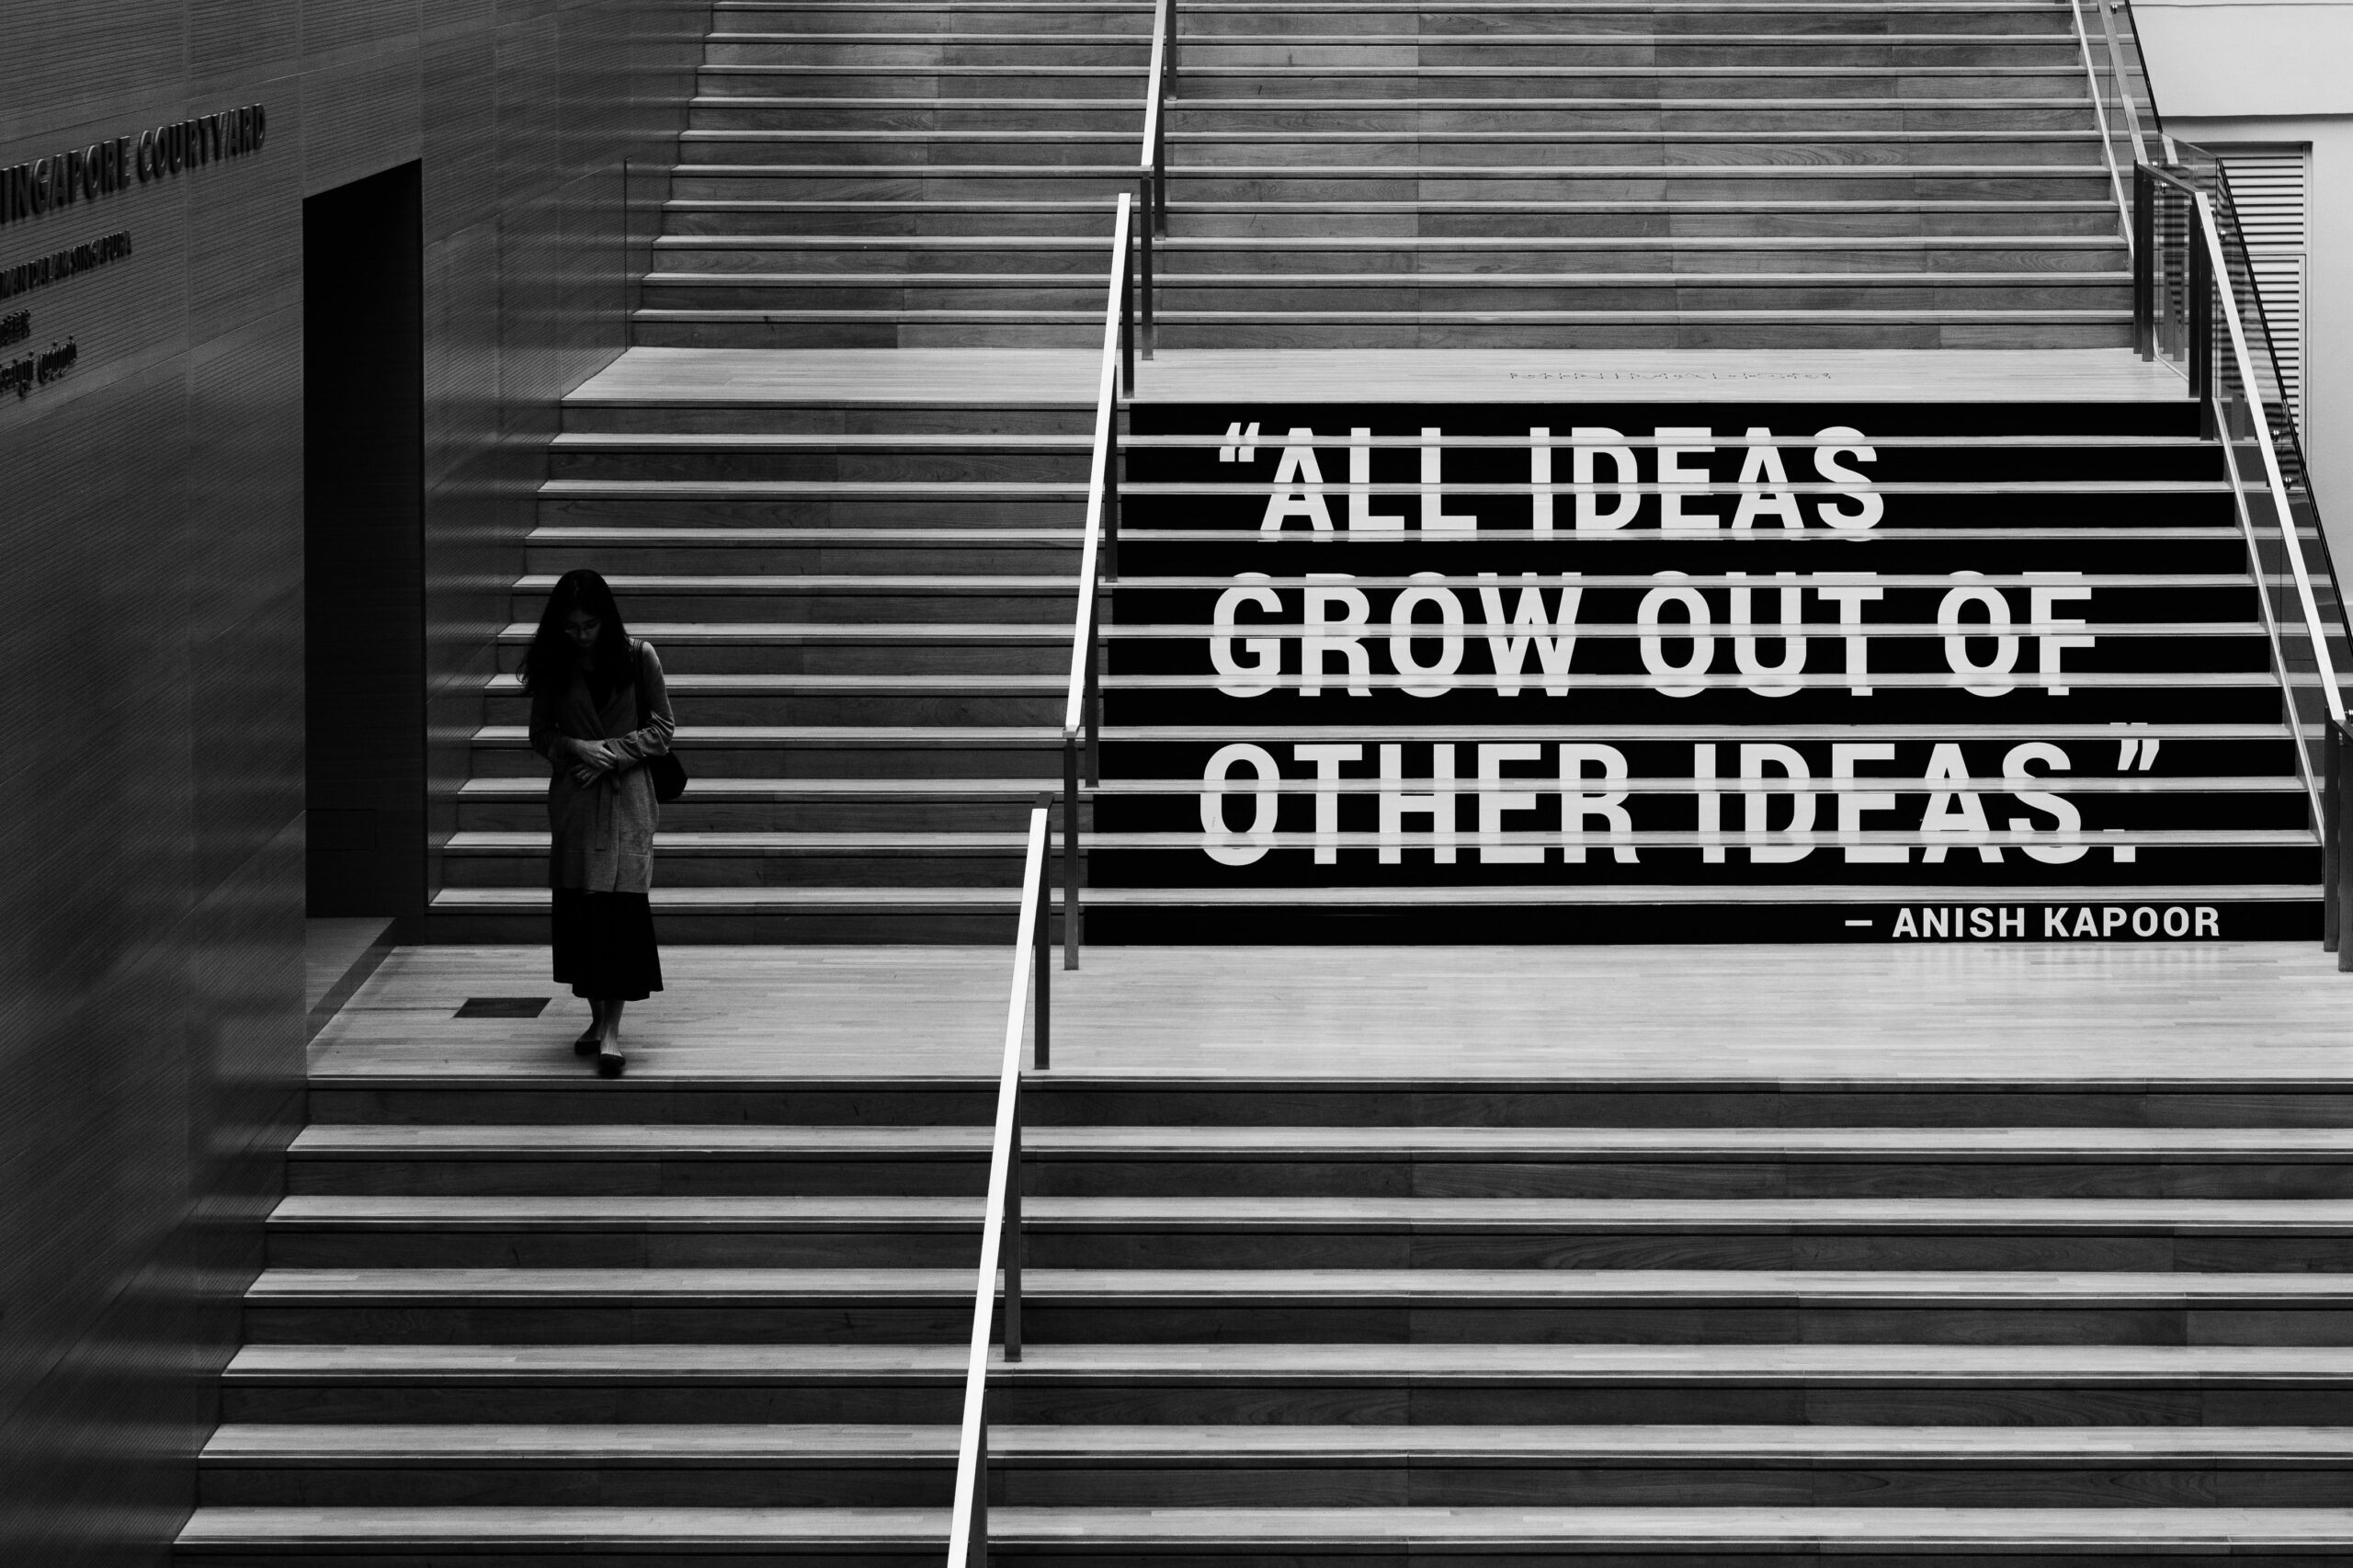 "All ideas grow out of other ideas." - Anish Kapoor quote written on a staircase